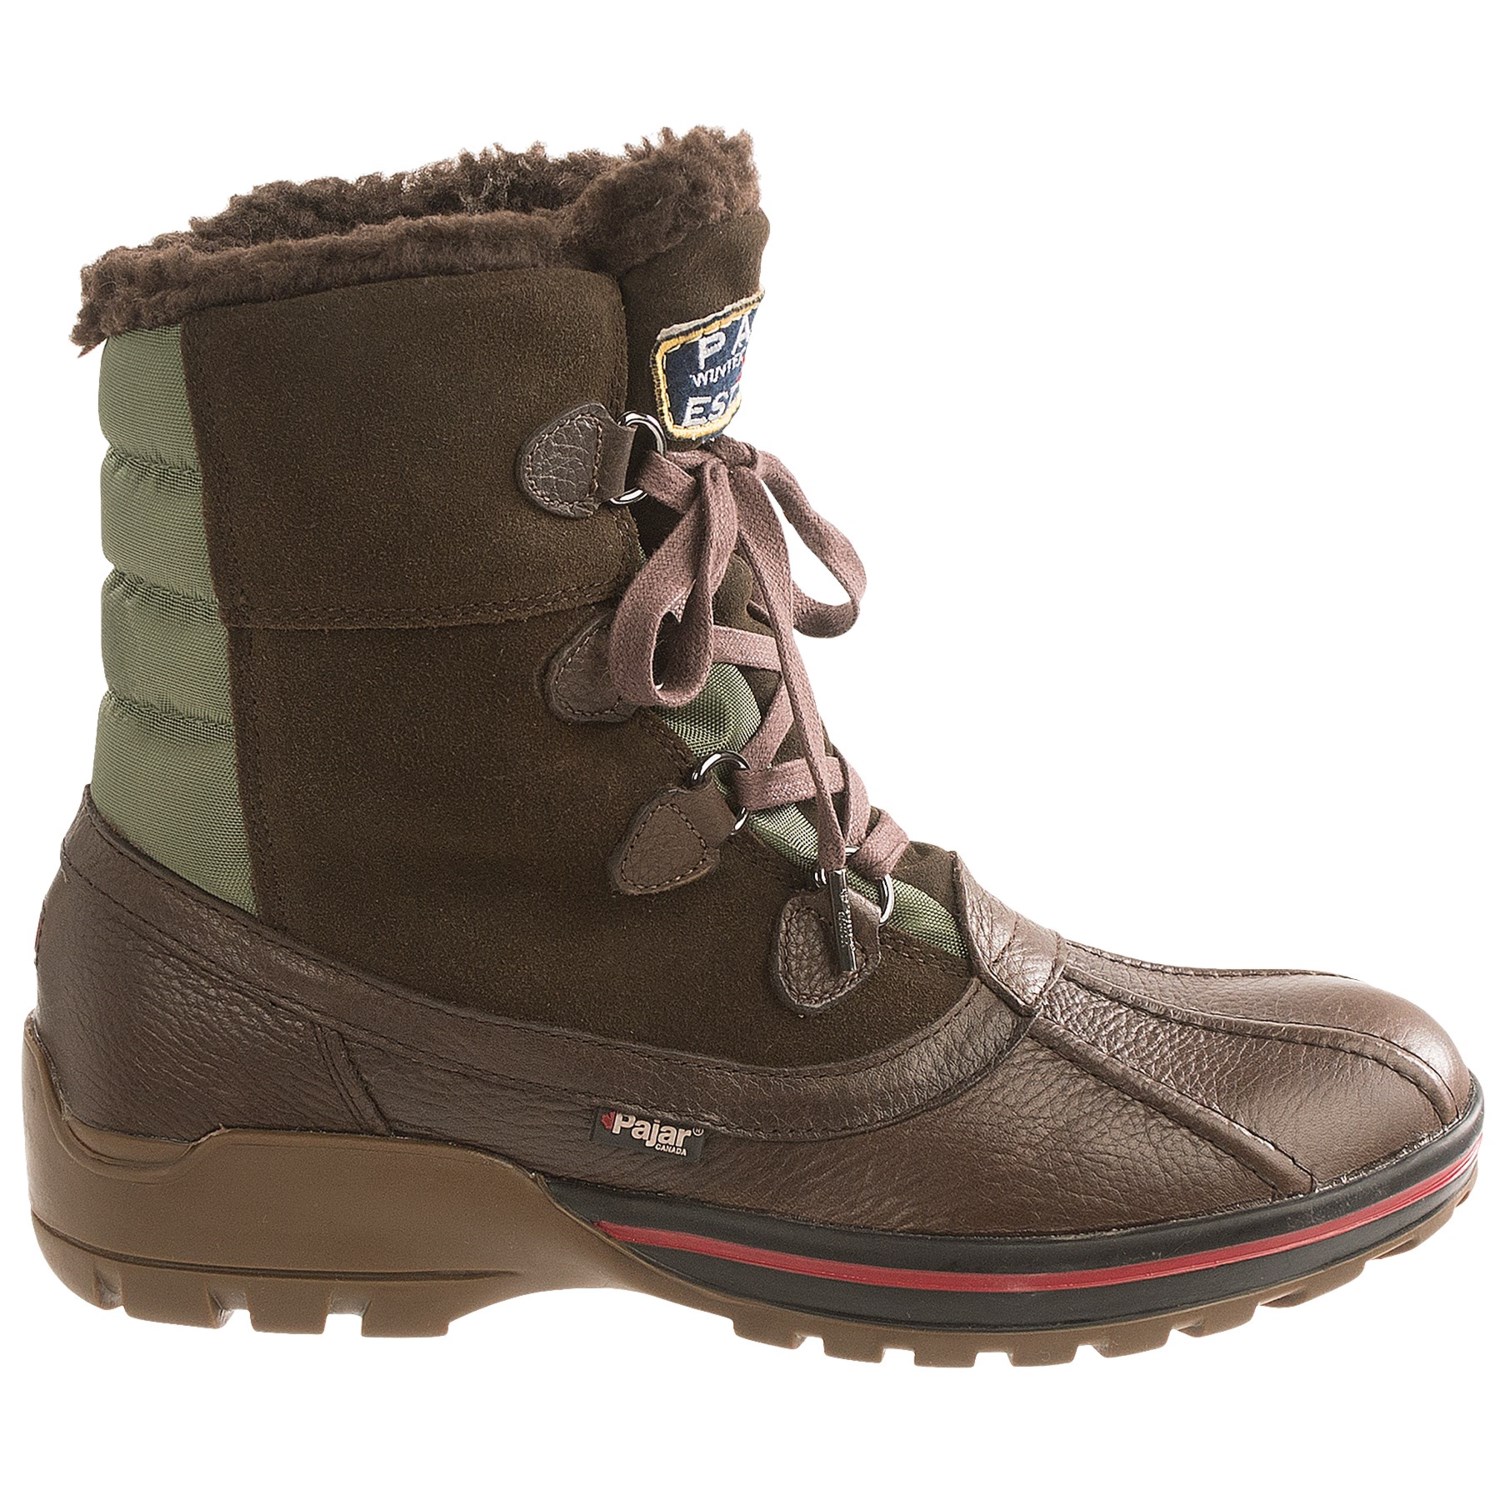 mens snow boots clearance